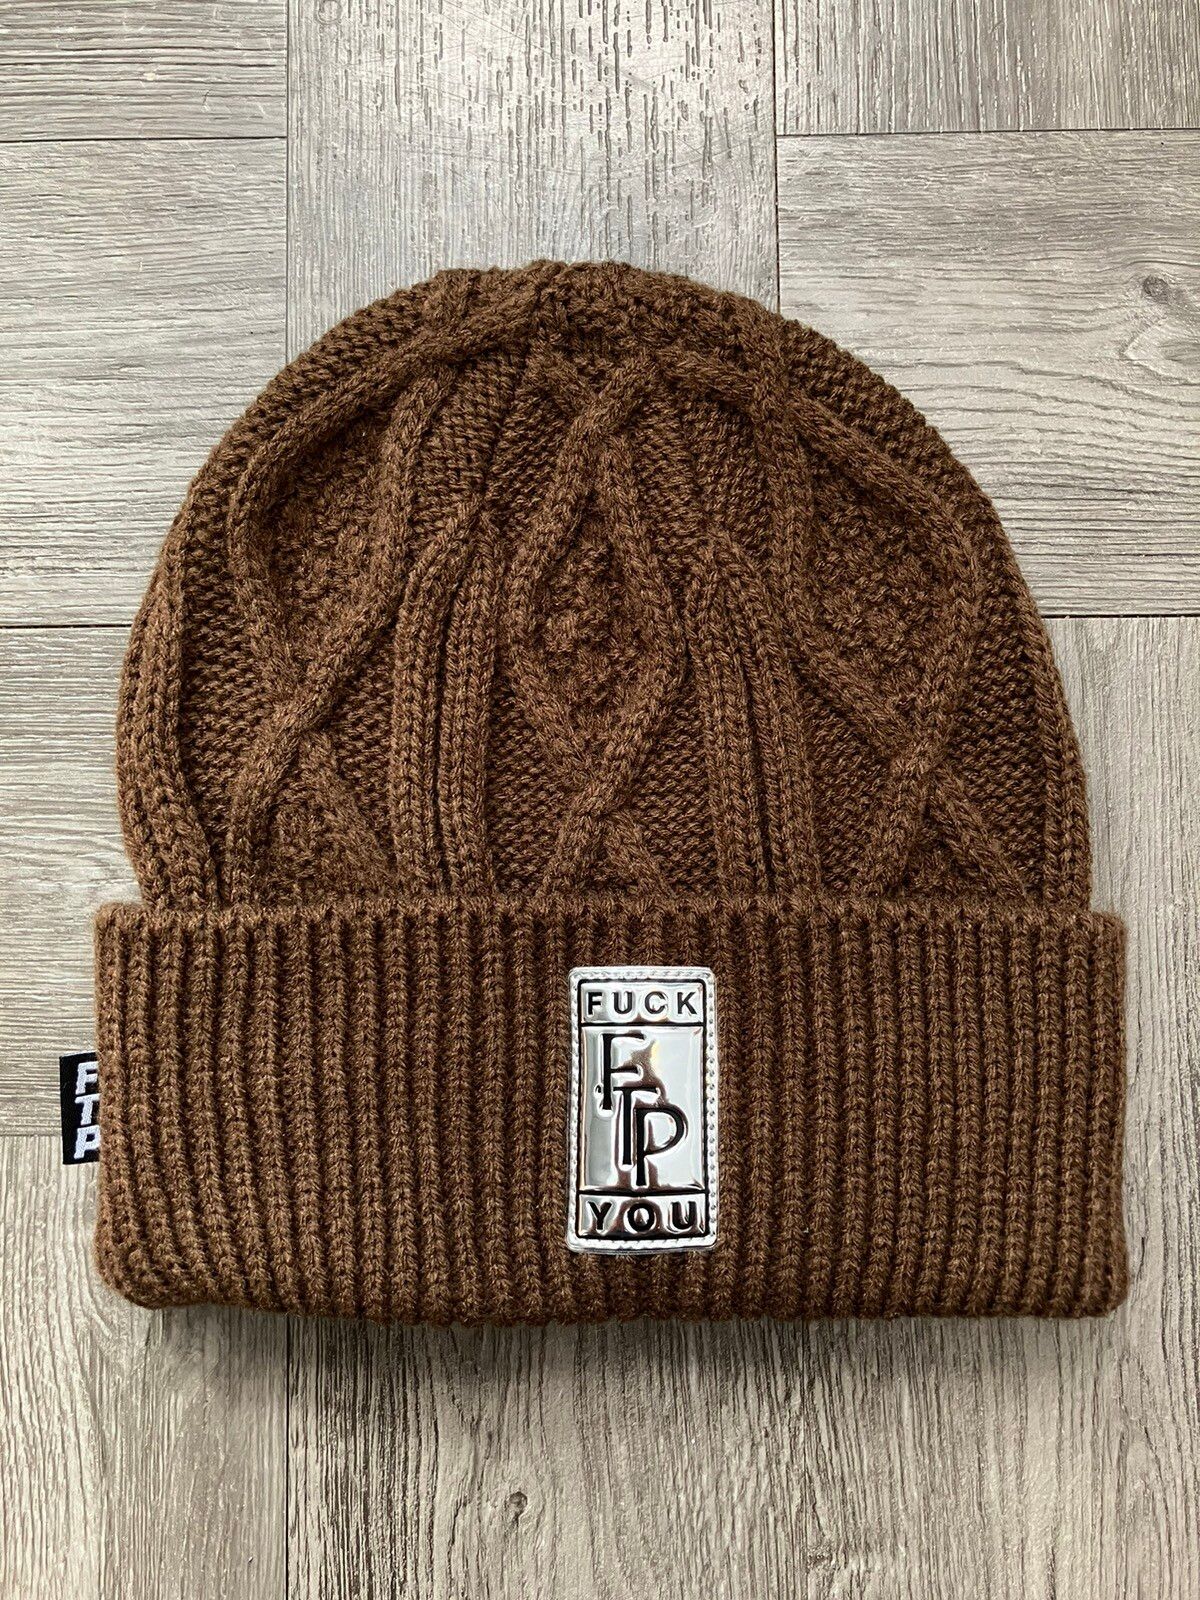 Fuck The Population FTP Big Body Cable Knit Beanie Brown | Grailed